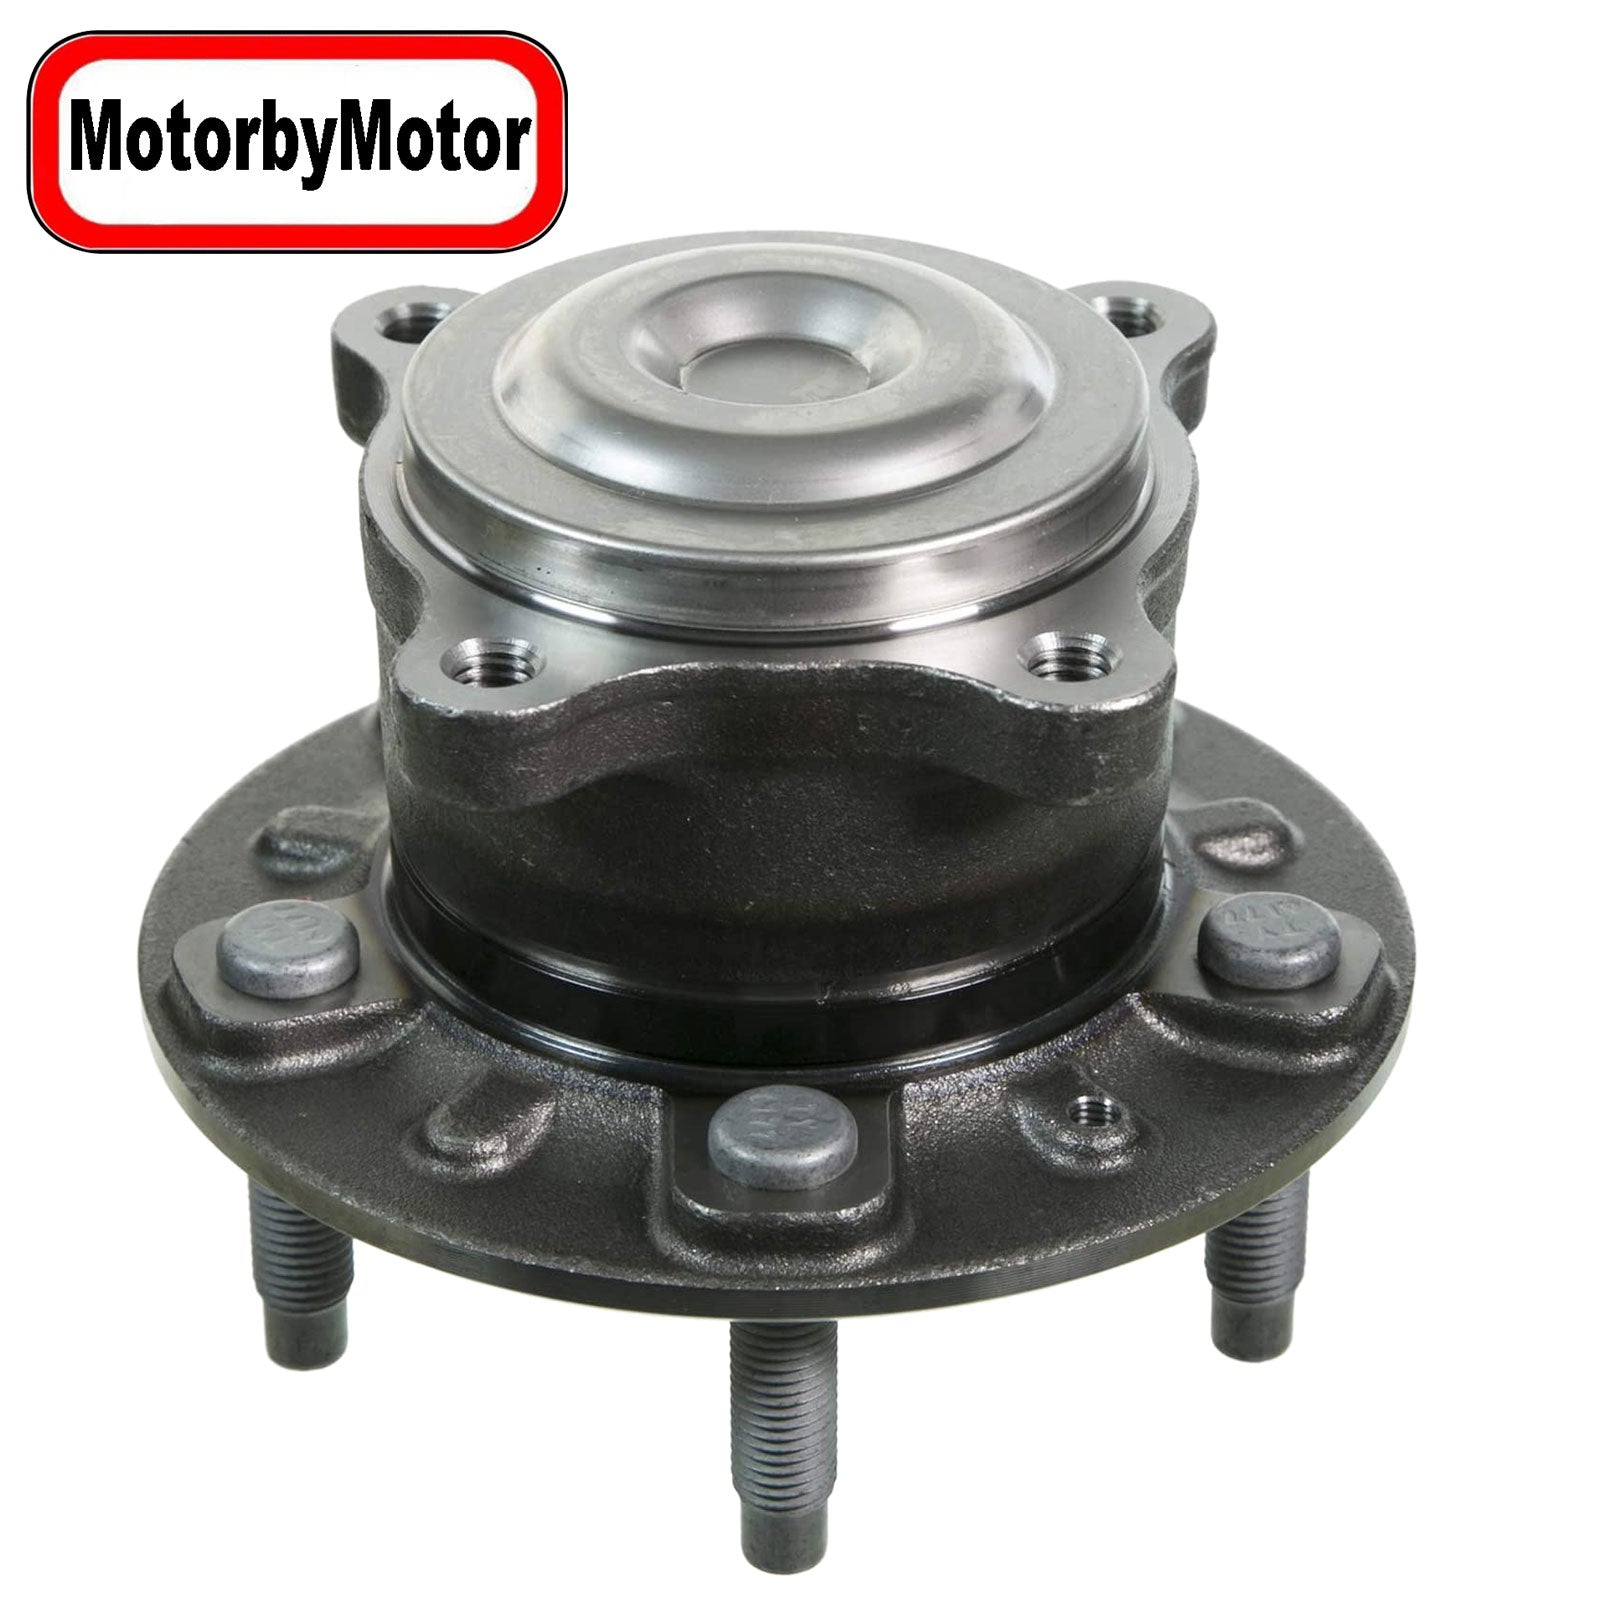 MotorbyMotor 512508 Rear Wheel Bearing and Hub Assembly with 5 Lugs fits for Buick Verano,Chevy Cruze,Chevy Volt Low-Runout OE Directly Replacement Hub Bearing MotorbyMotor